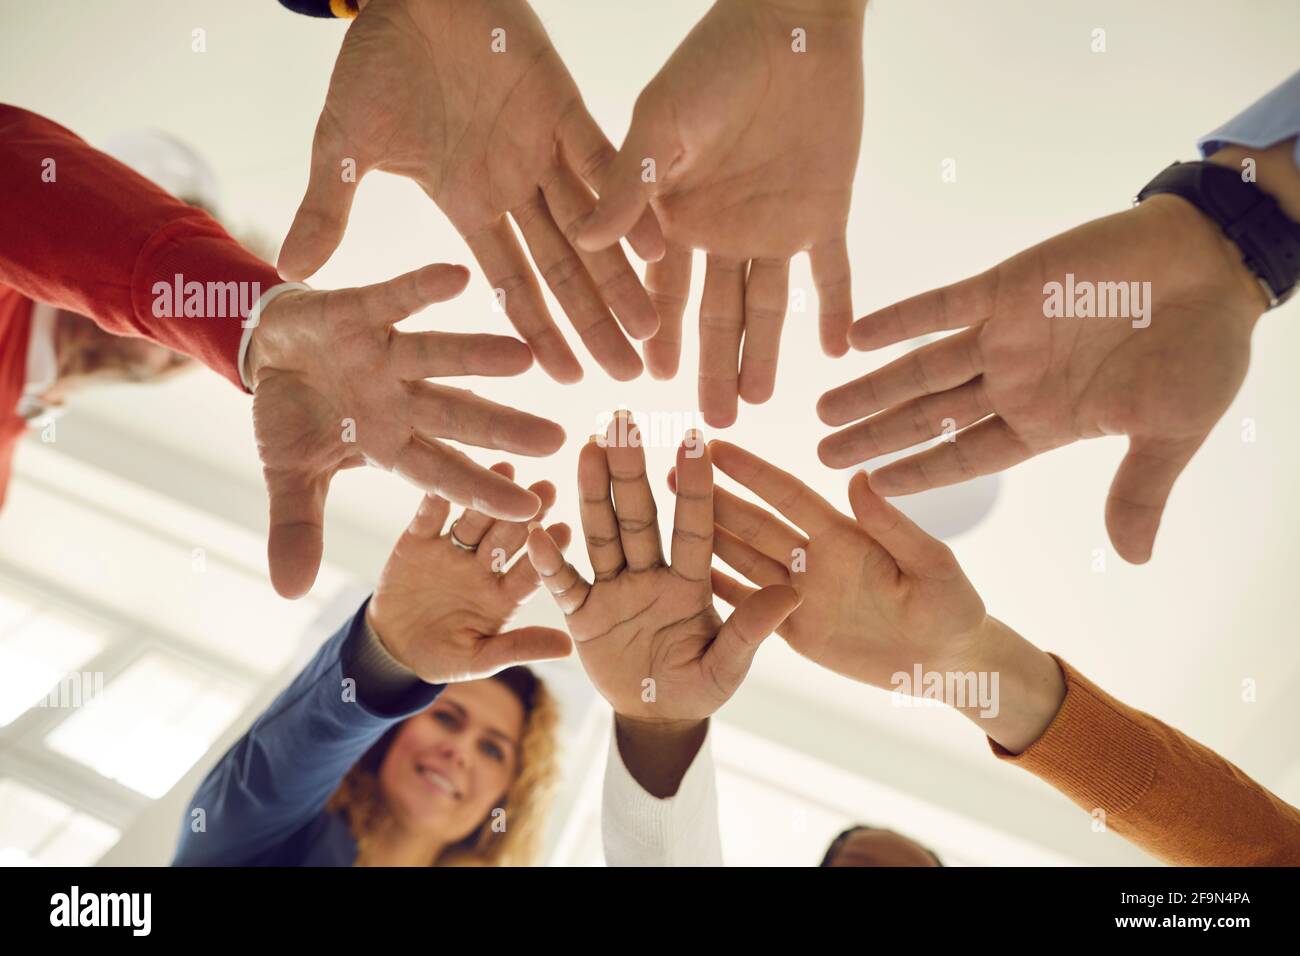 Group of people fold their hands to each other which symbolizes their unity and support. Stock Photo